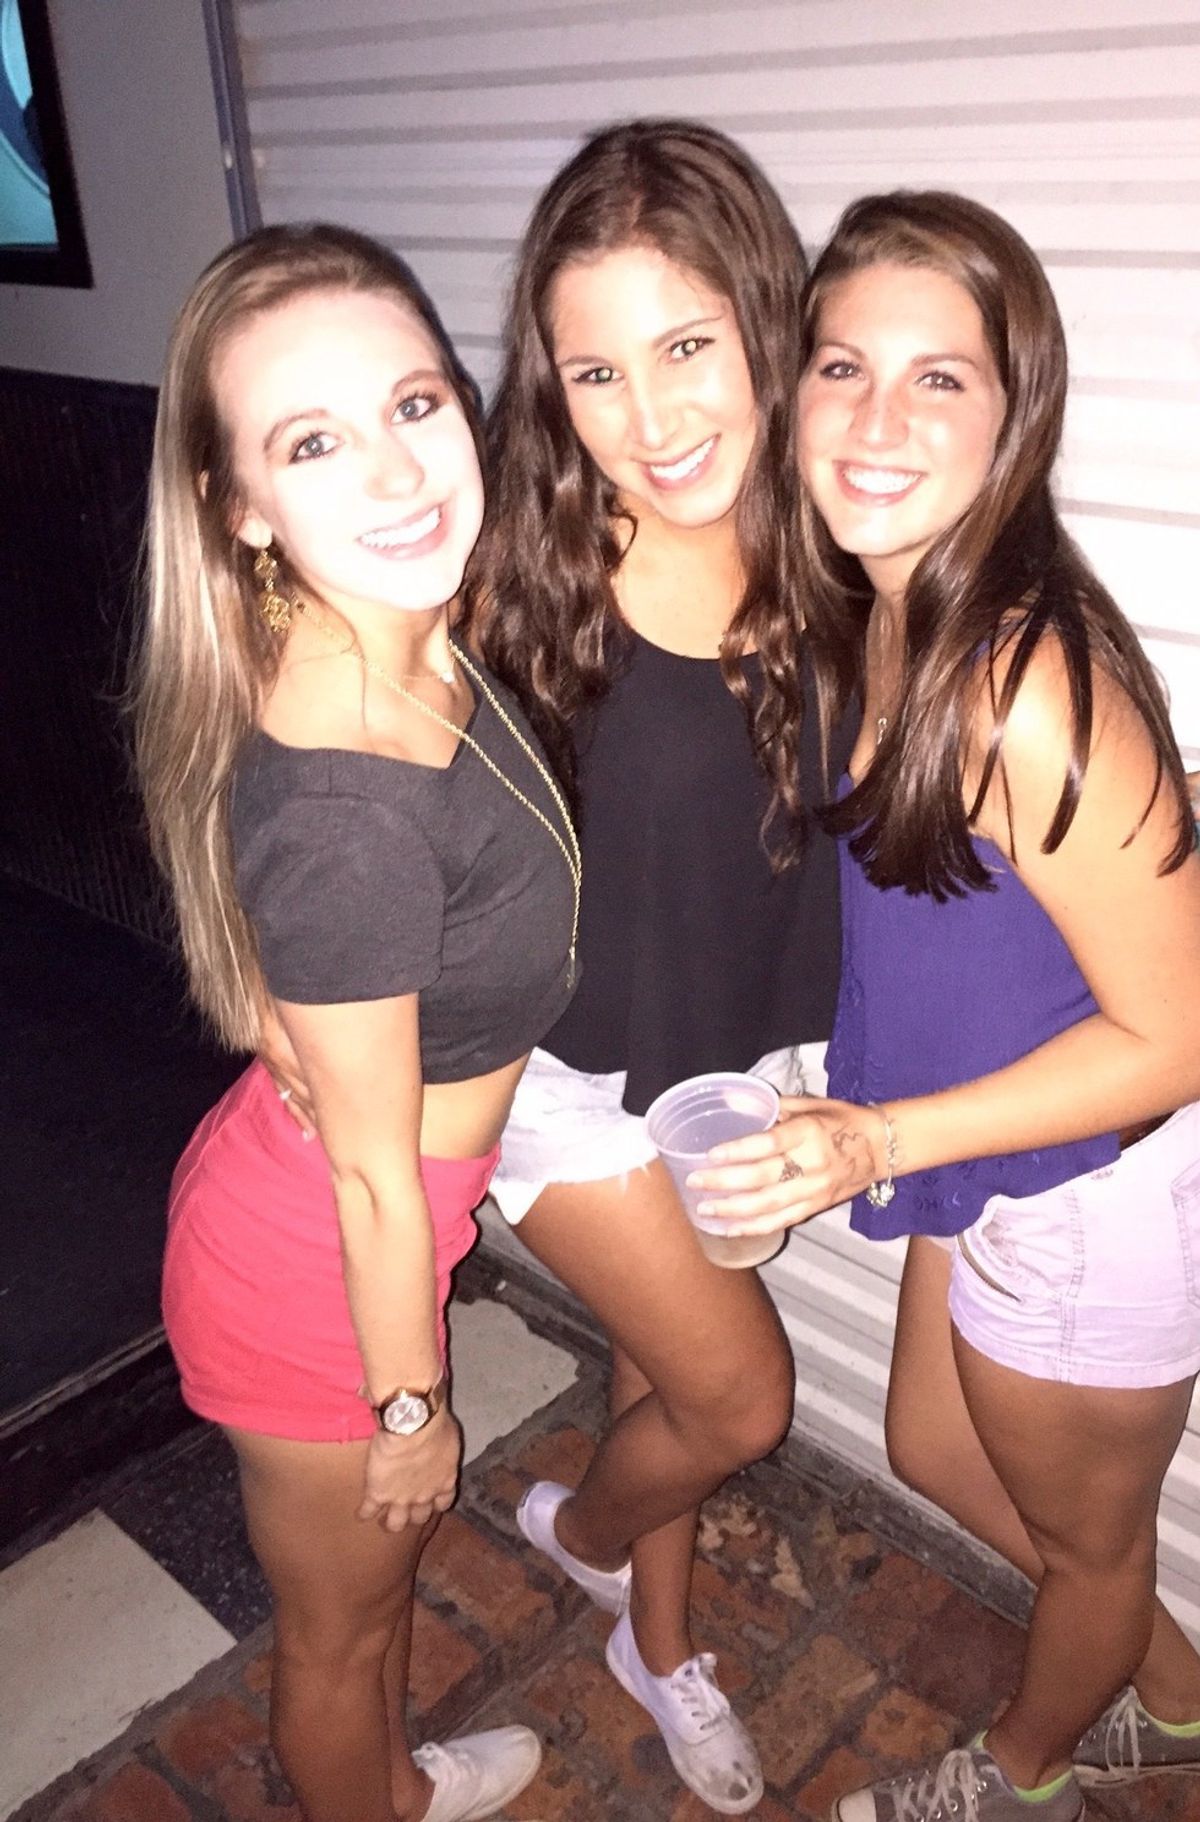 14 Reasons Why Tigerland Bars Are Basically The Same As Frat Parties